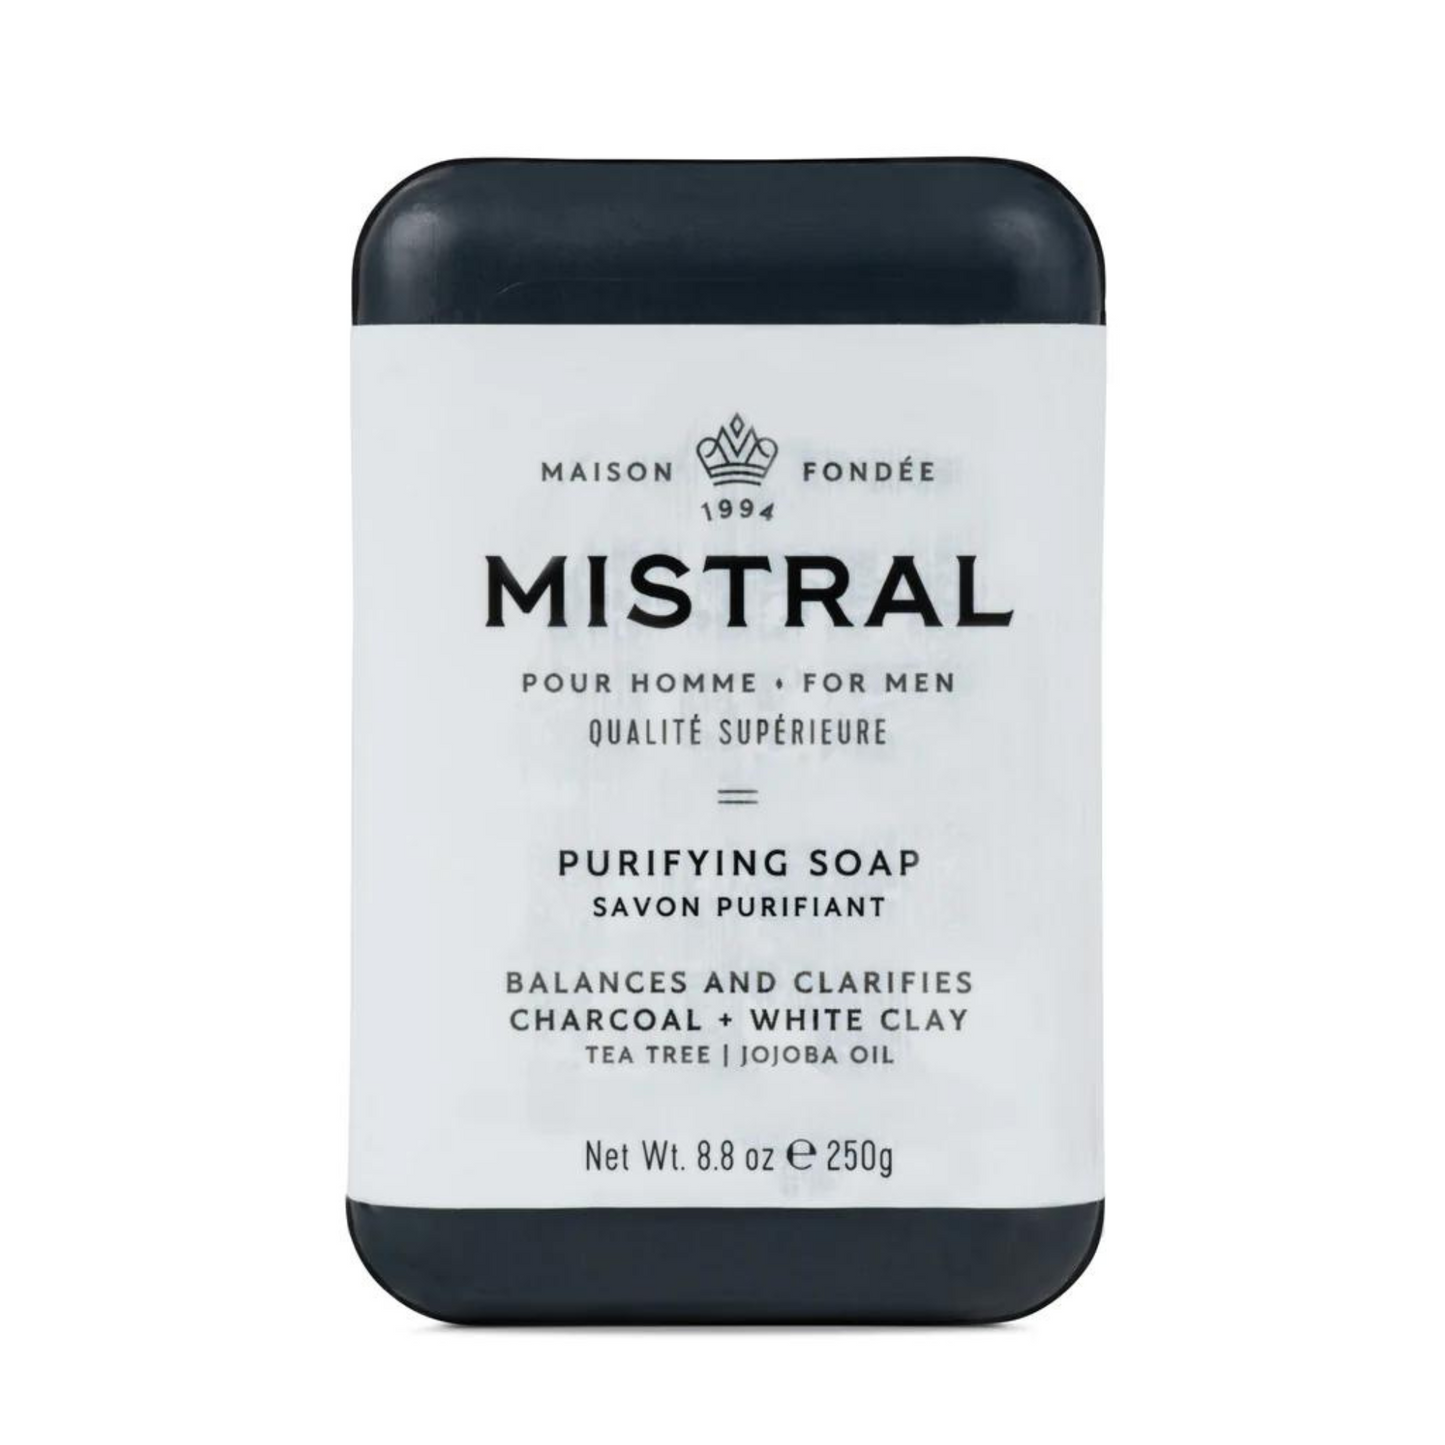 Primary Image of Mistral Purifying Soap (8.8 oz)